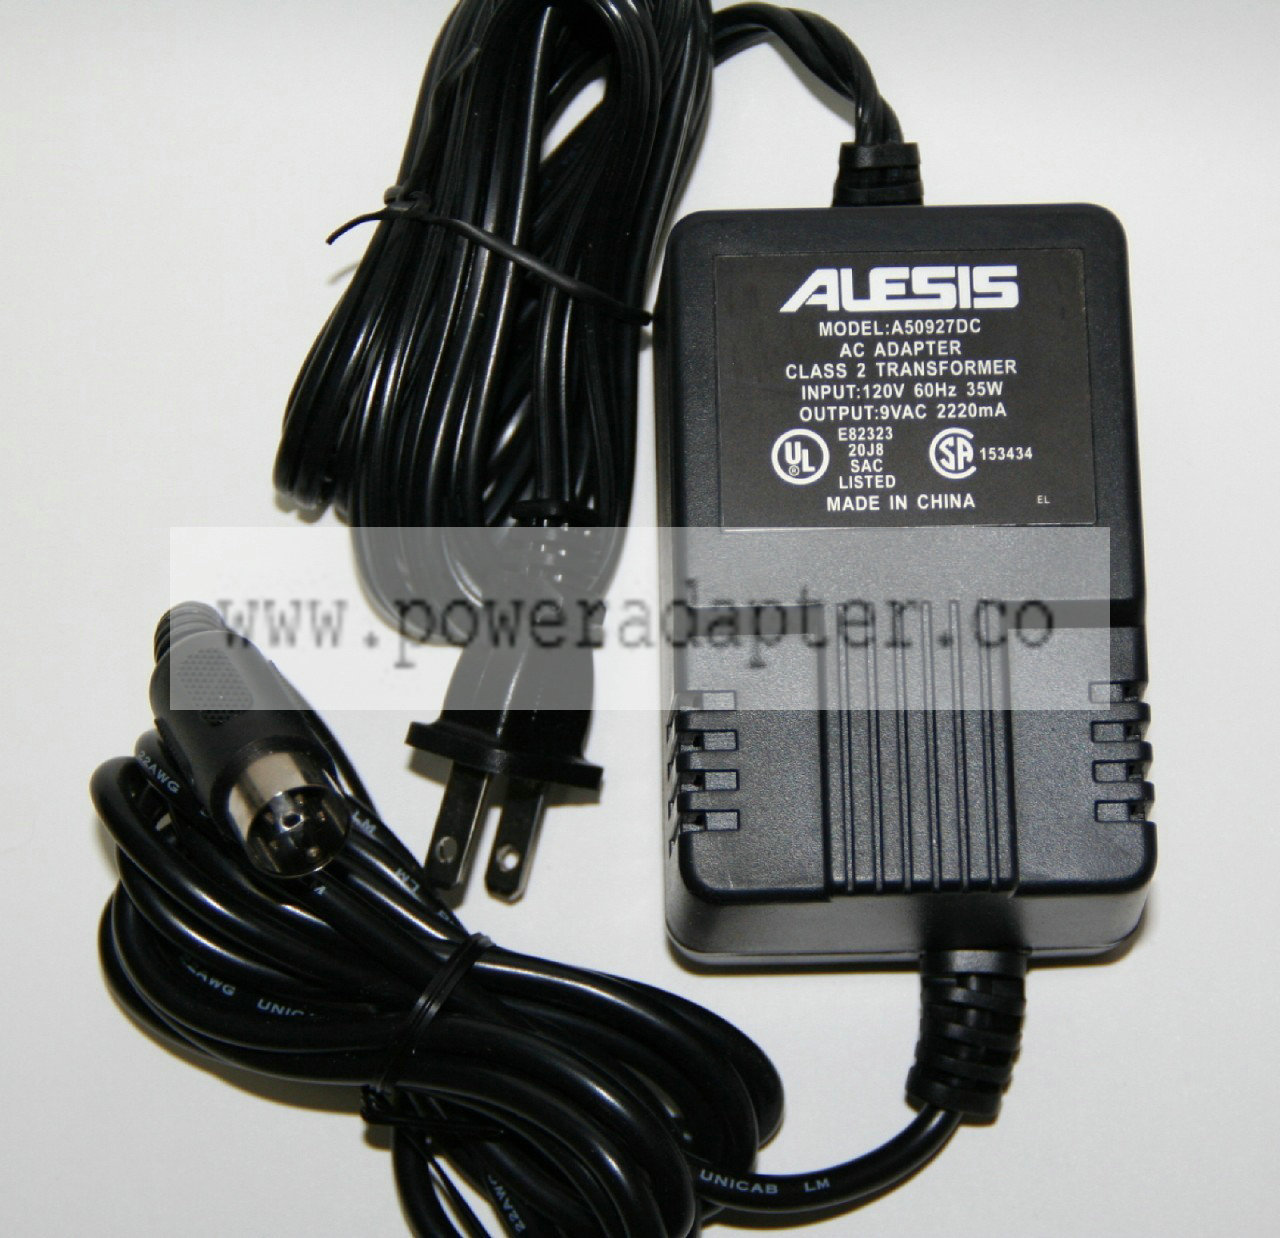 Alesis P4 replacement power supply Product Description Alesis Replacement Power Supply